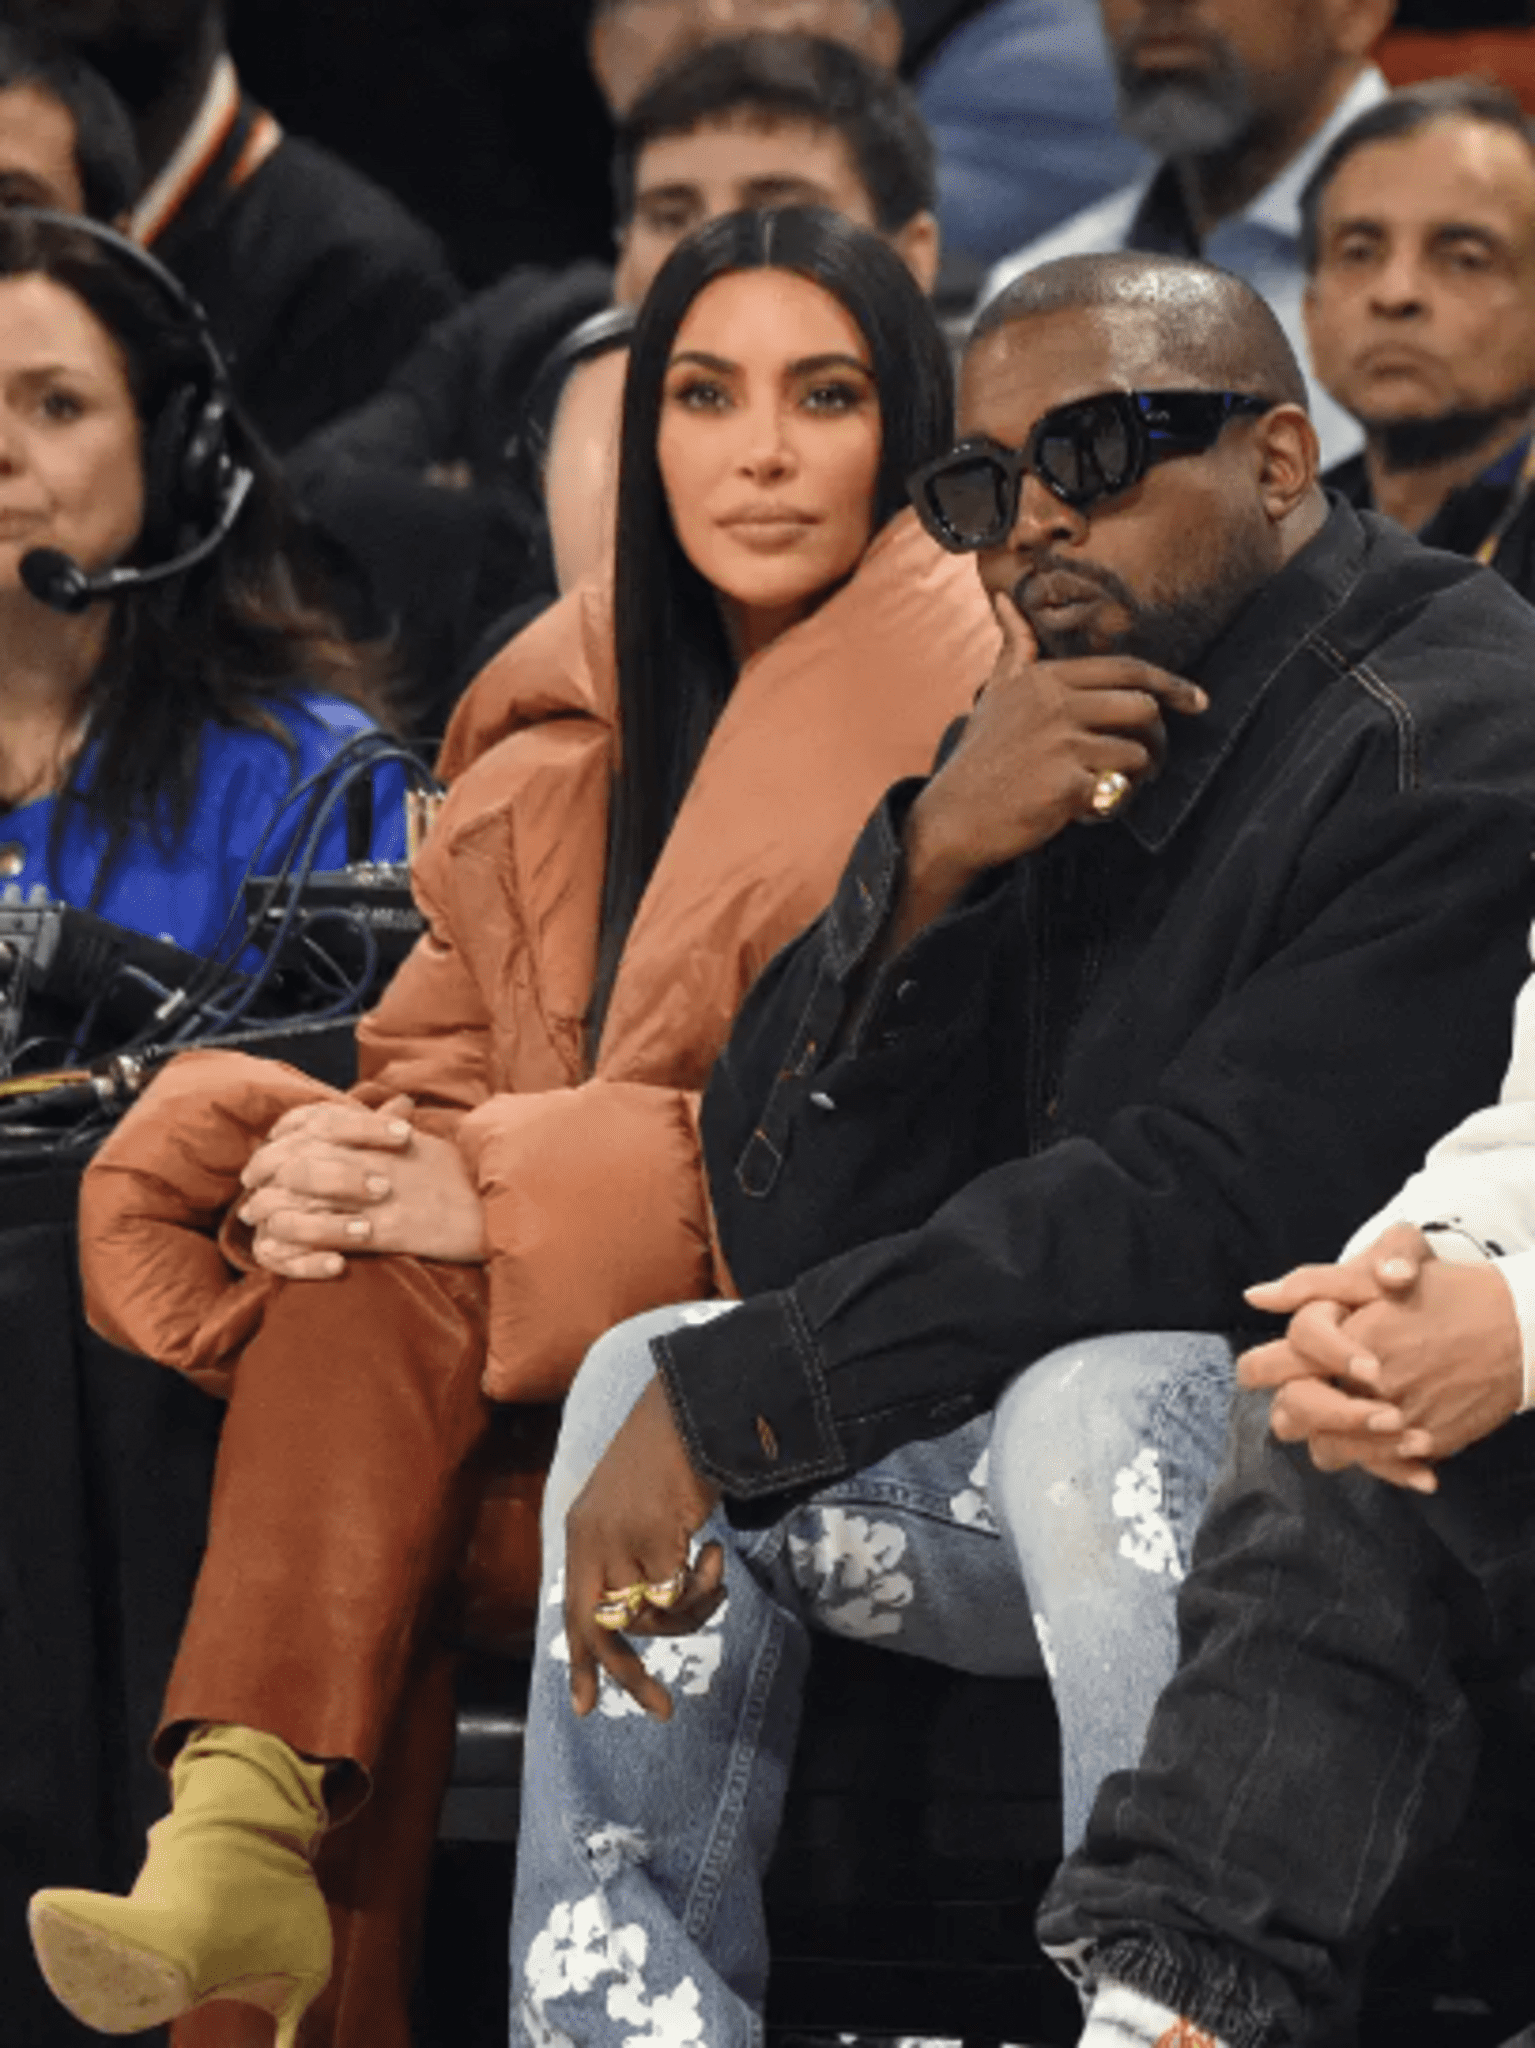 After Kanye West's Anti-Semitic Comments, His Divorce Attorneys Cut Ties With Him